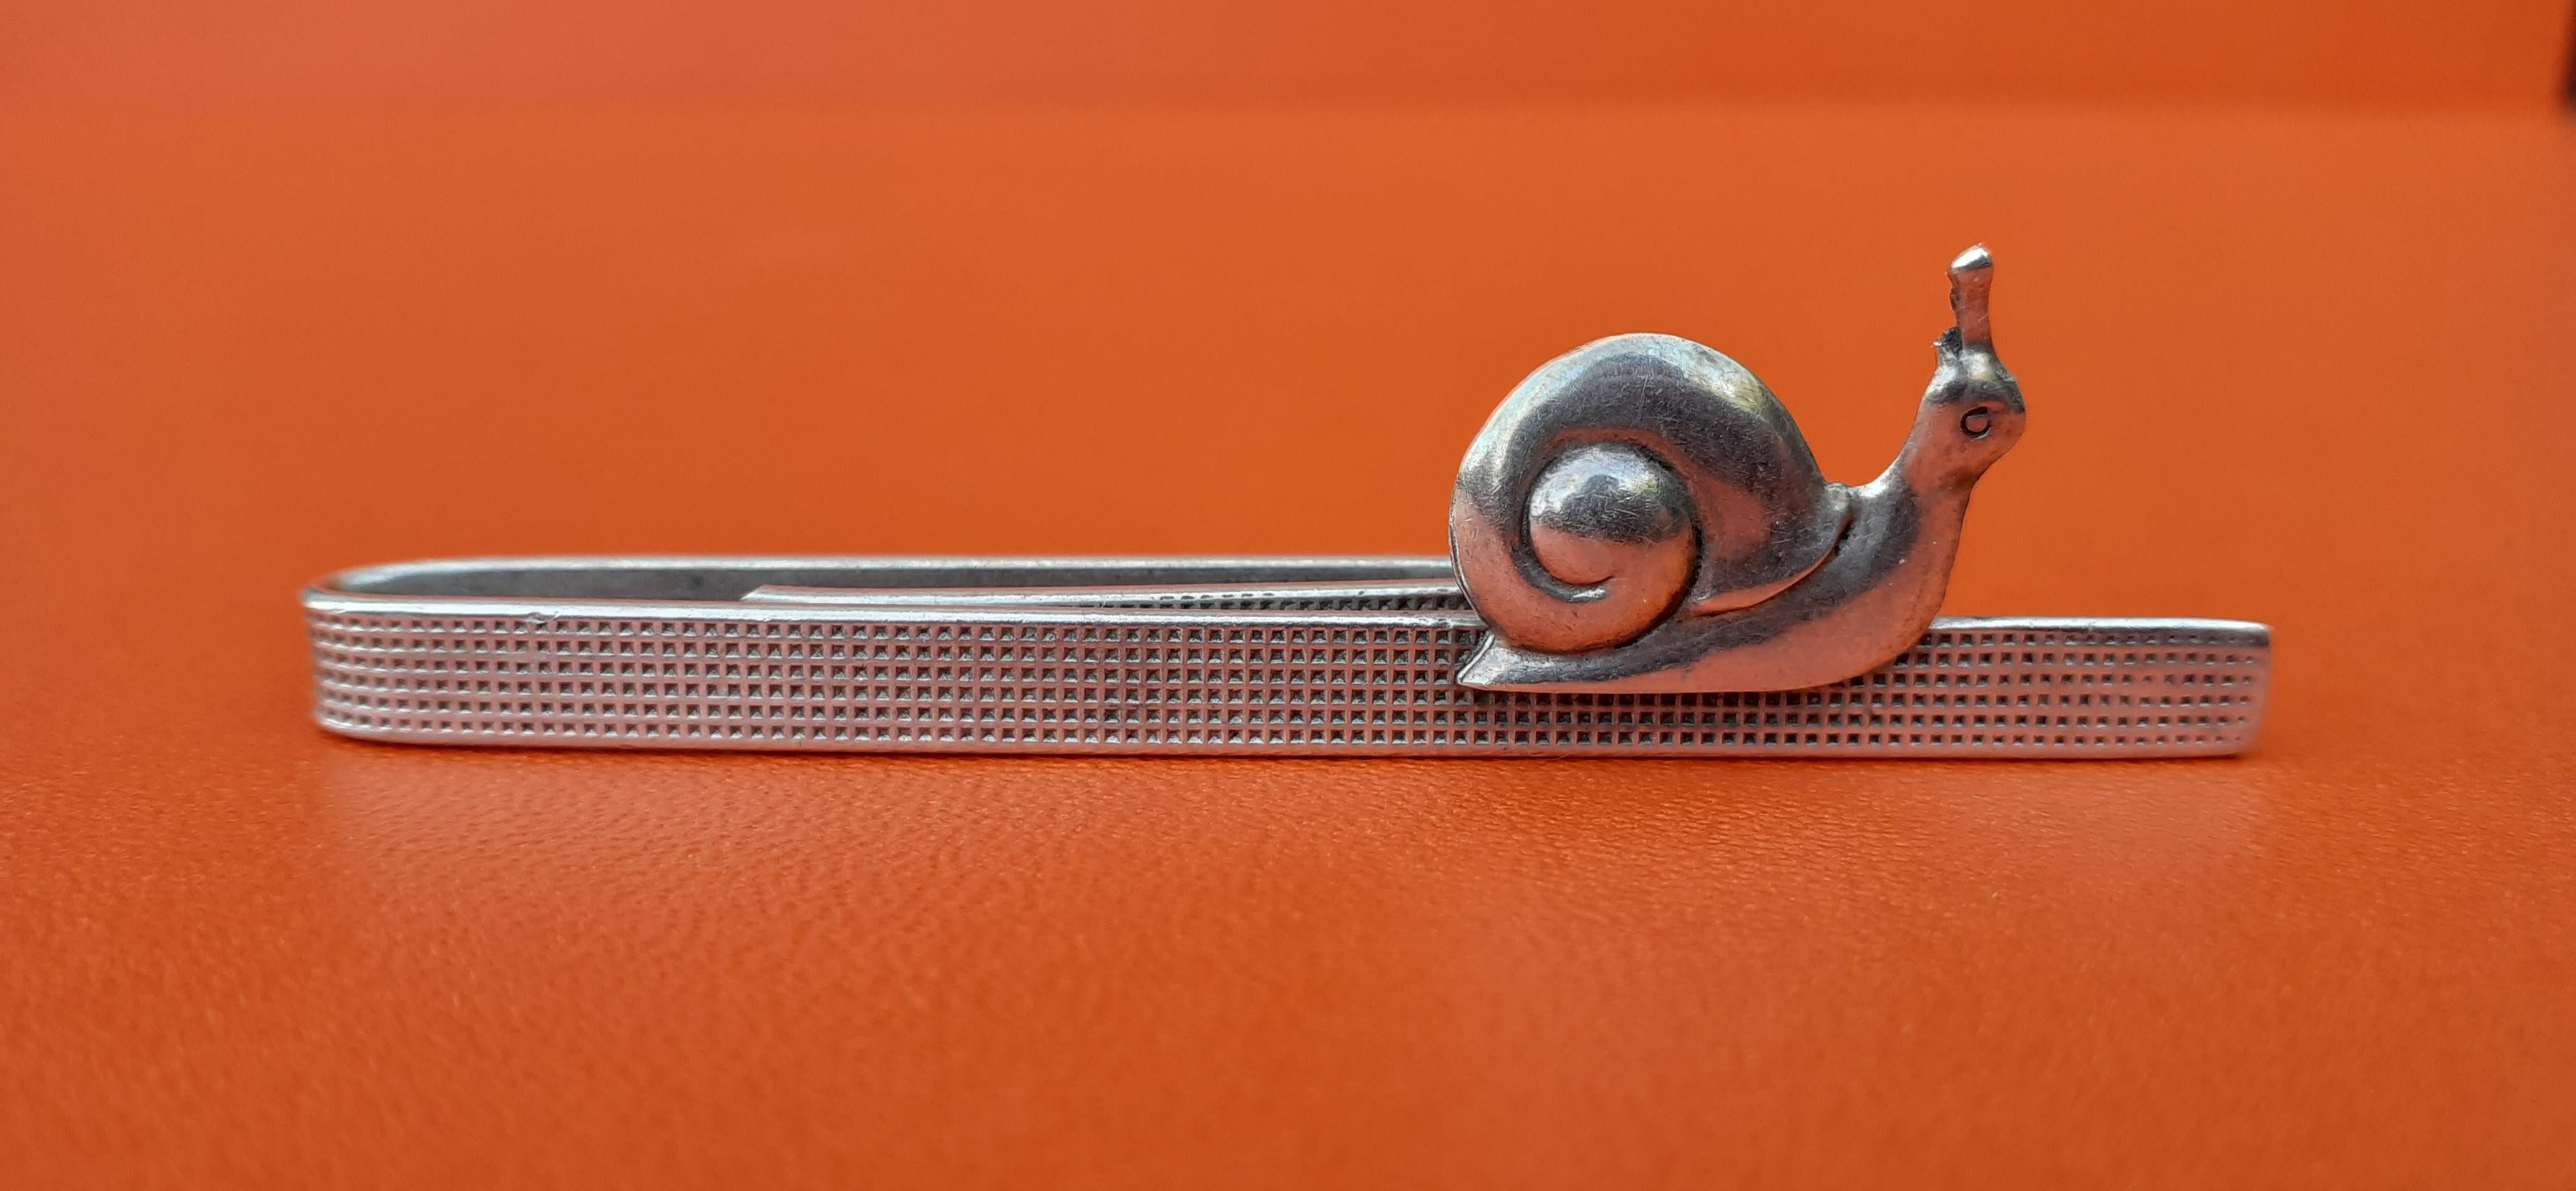 Authentic Hermès Tie Pin

Pattern: Cute Snail

Probably a vintage item

Made of Stering Silver

